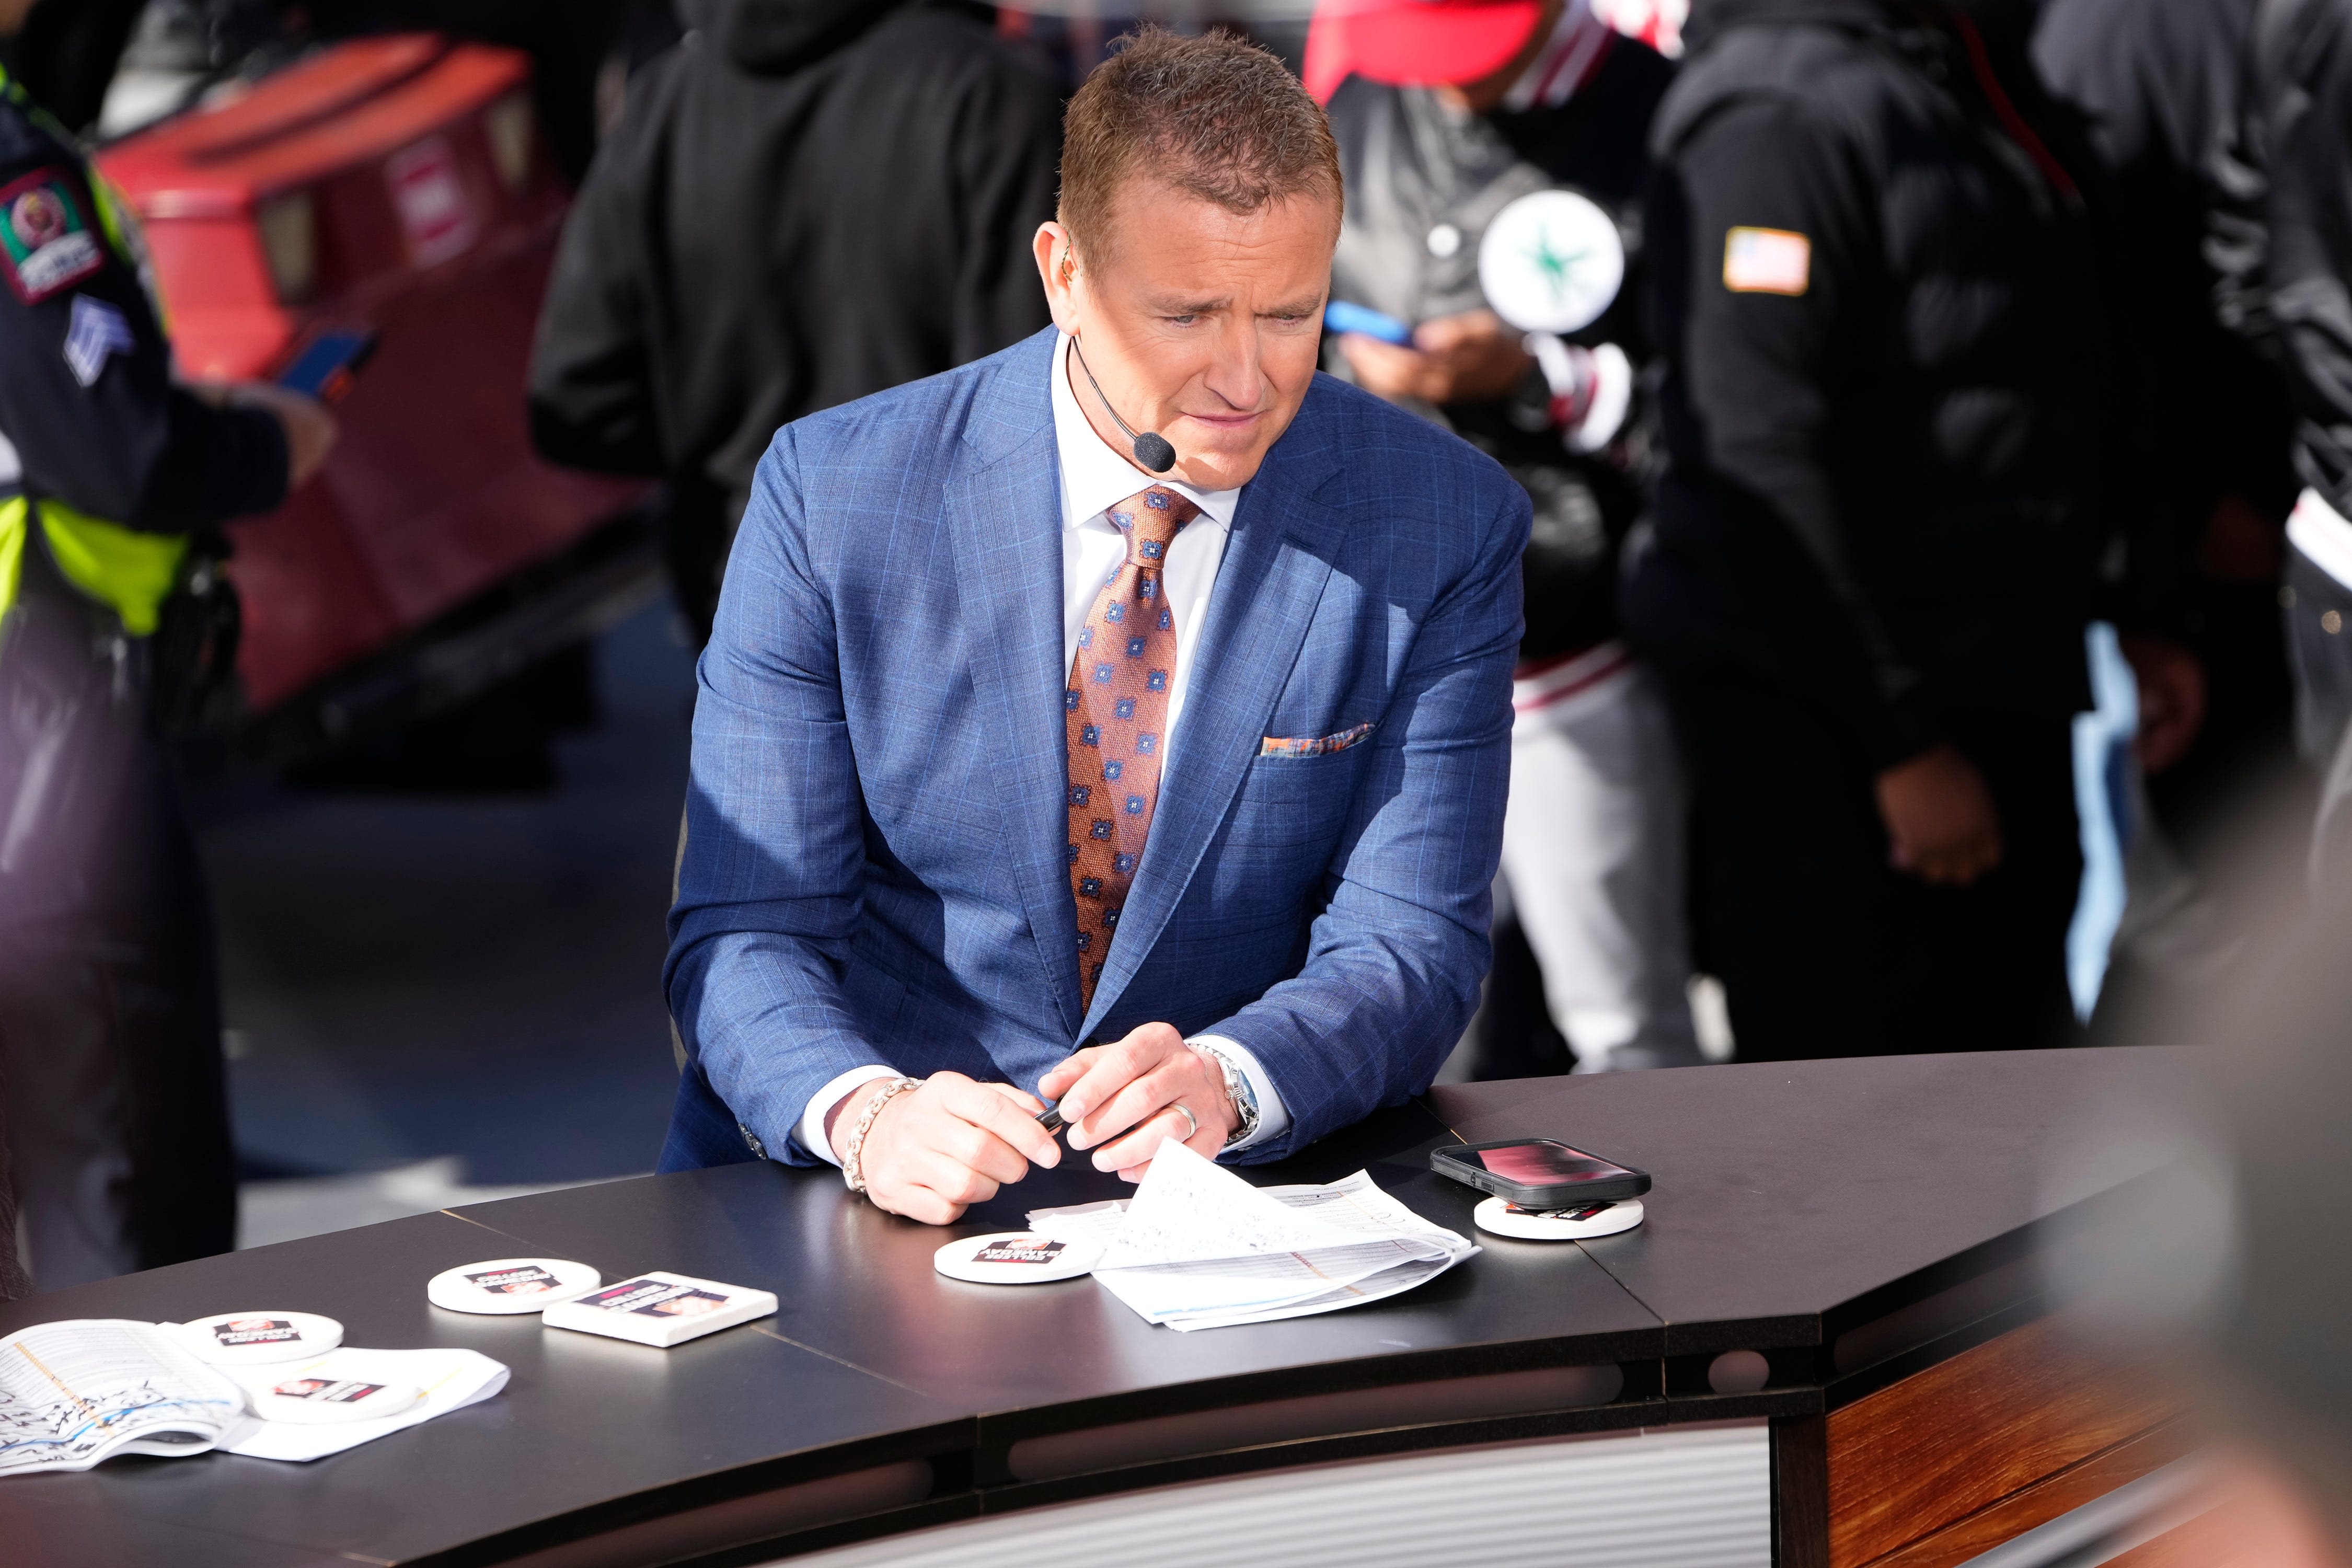 How an Ohio State team psychiatrist helped change Kirk Herbstreit's college football career